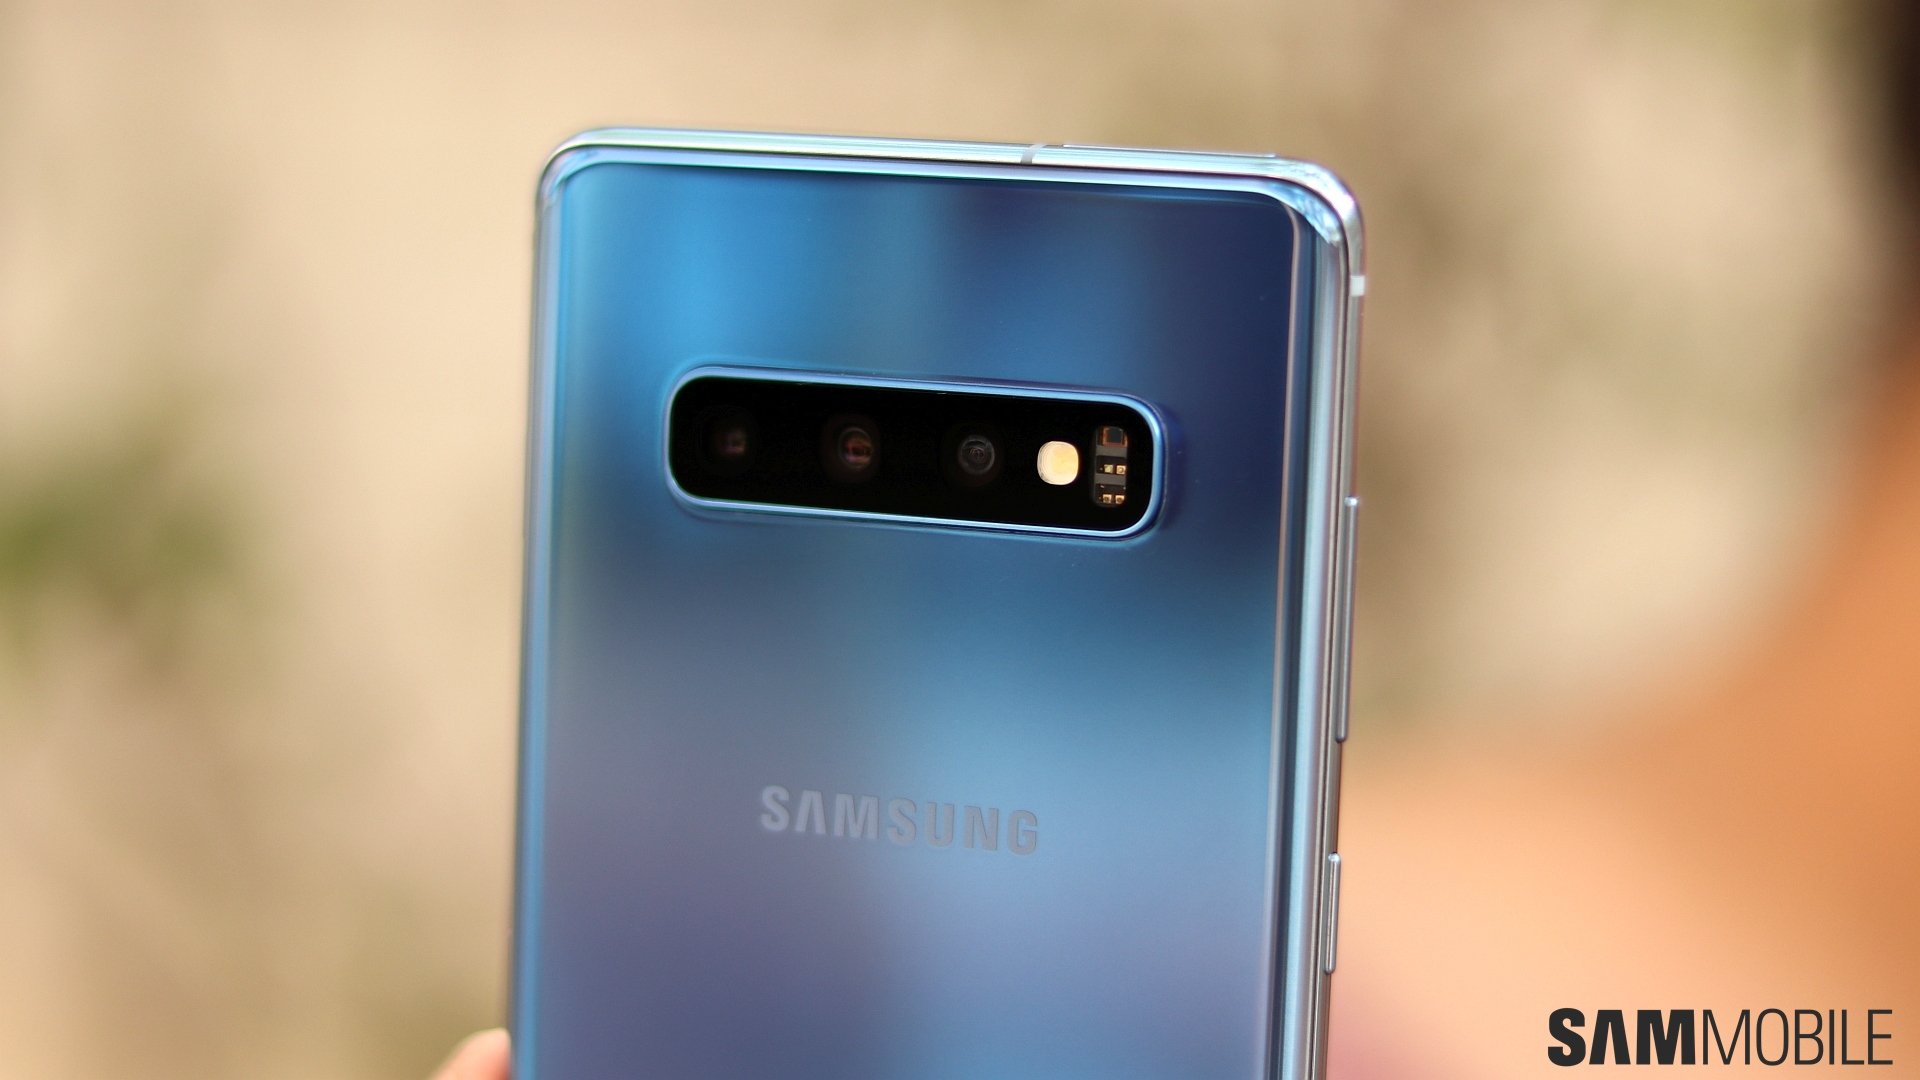 Samsung Galaxy S10: What Each Camera Does, and What Photos Look Like